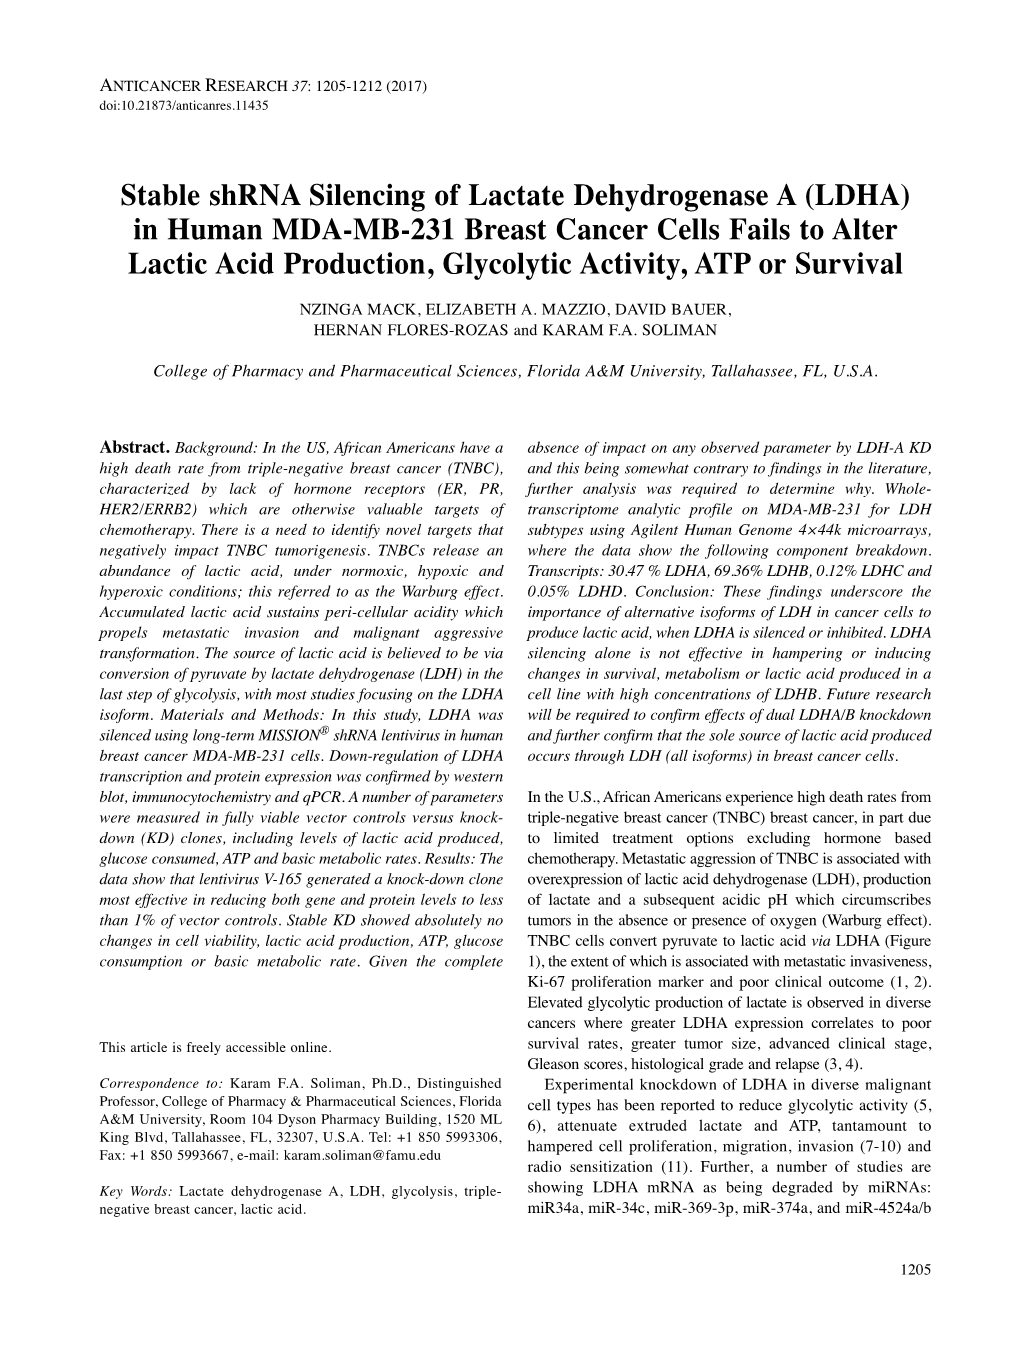 Stable Shrna Silencing of Lactate Dehydrogenase a (LDHA)